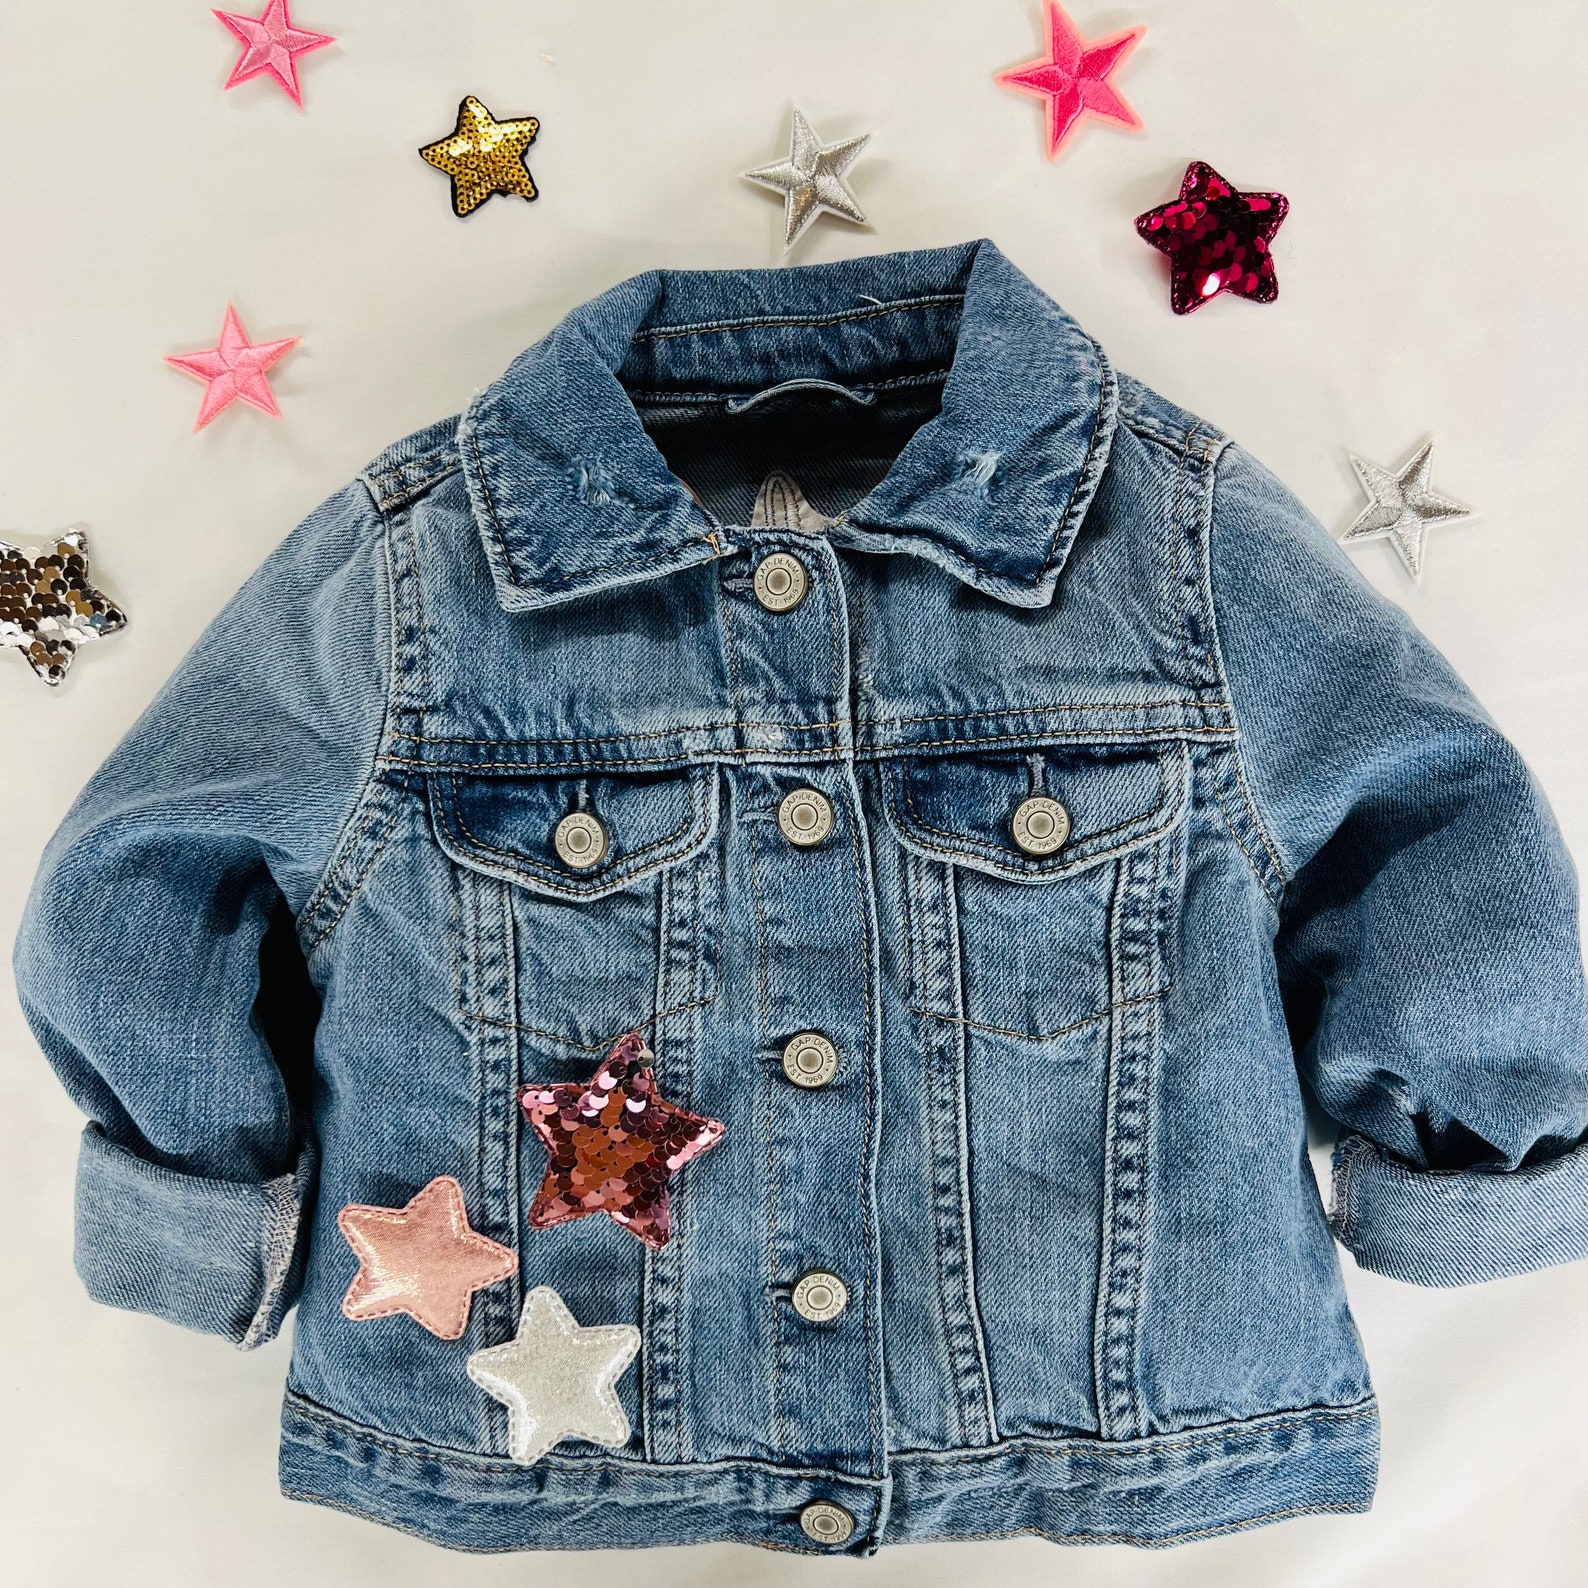 Star Spangled Girl Embroidered Name With a Multitude of Shiny - Etsy